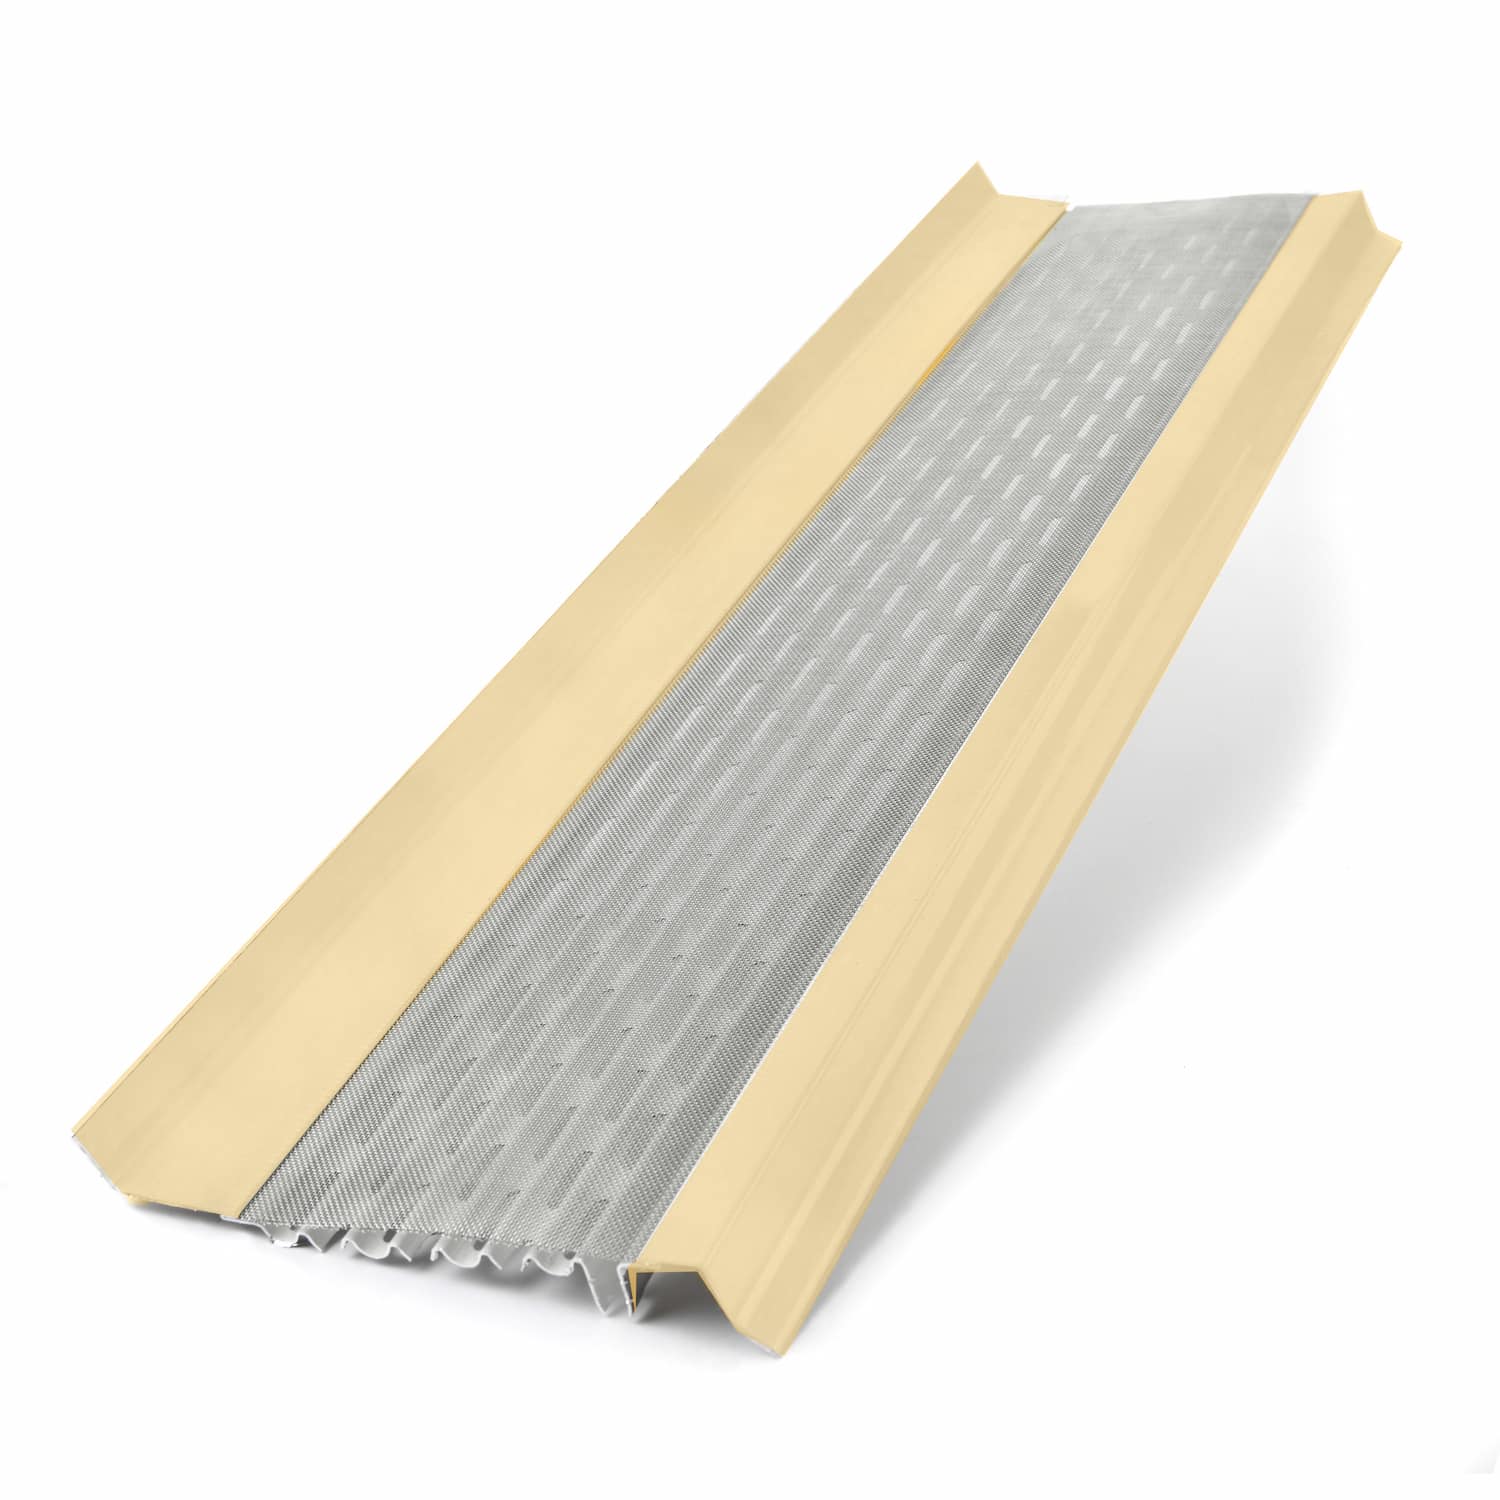 6 inch micromesh gutter guards creme